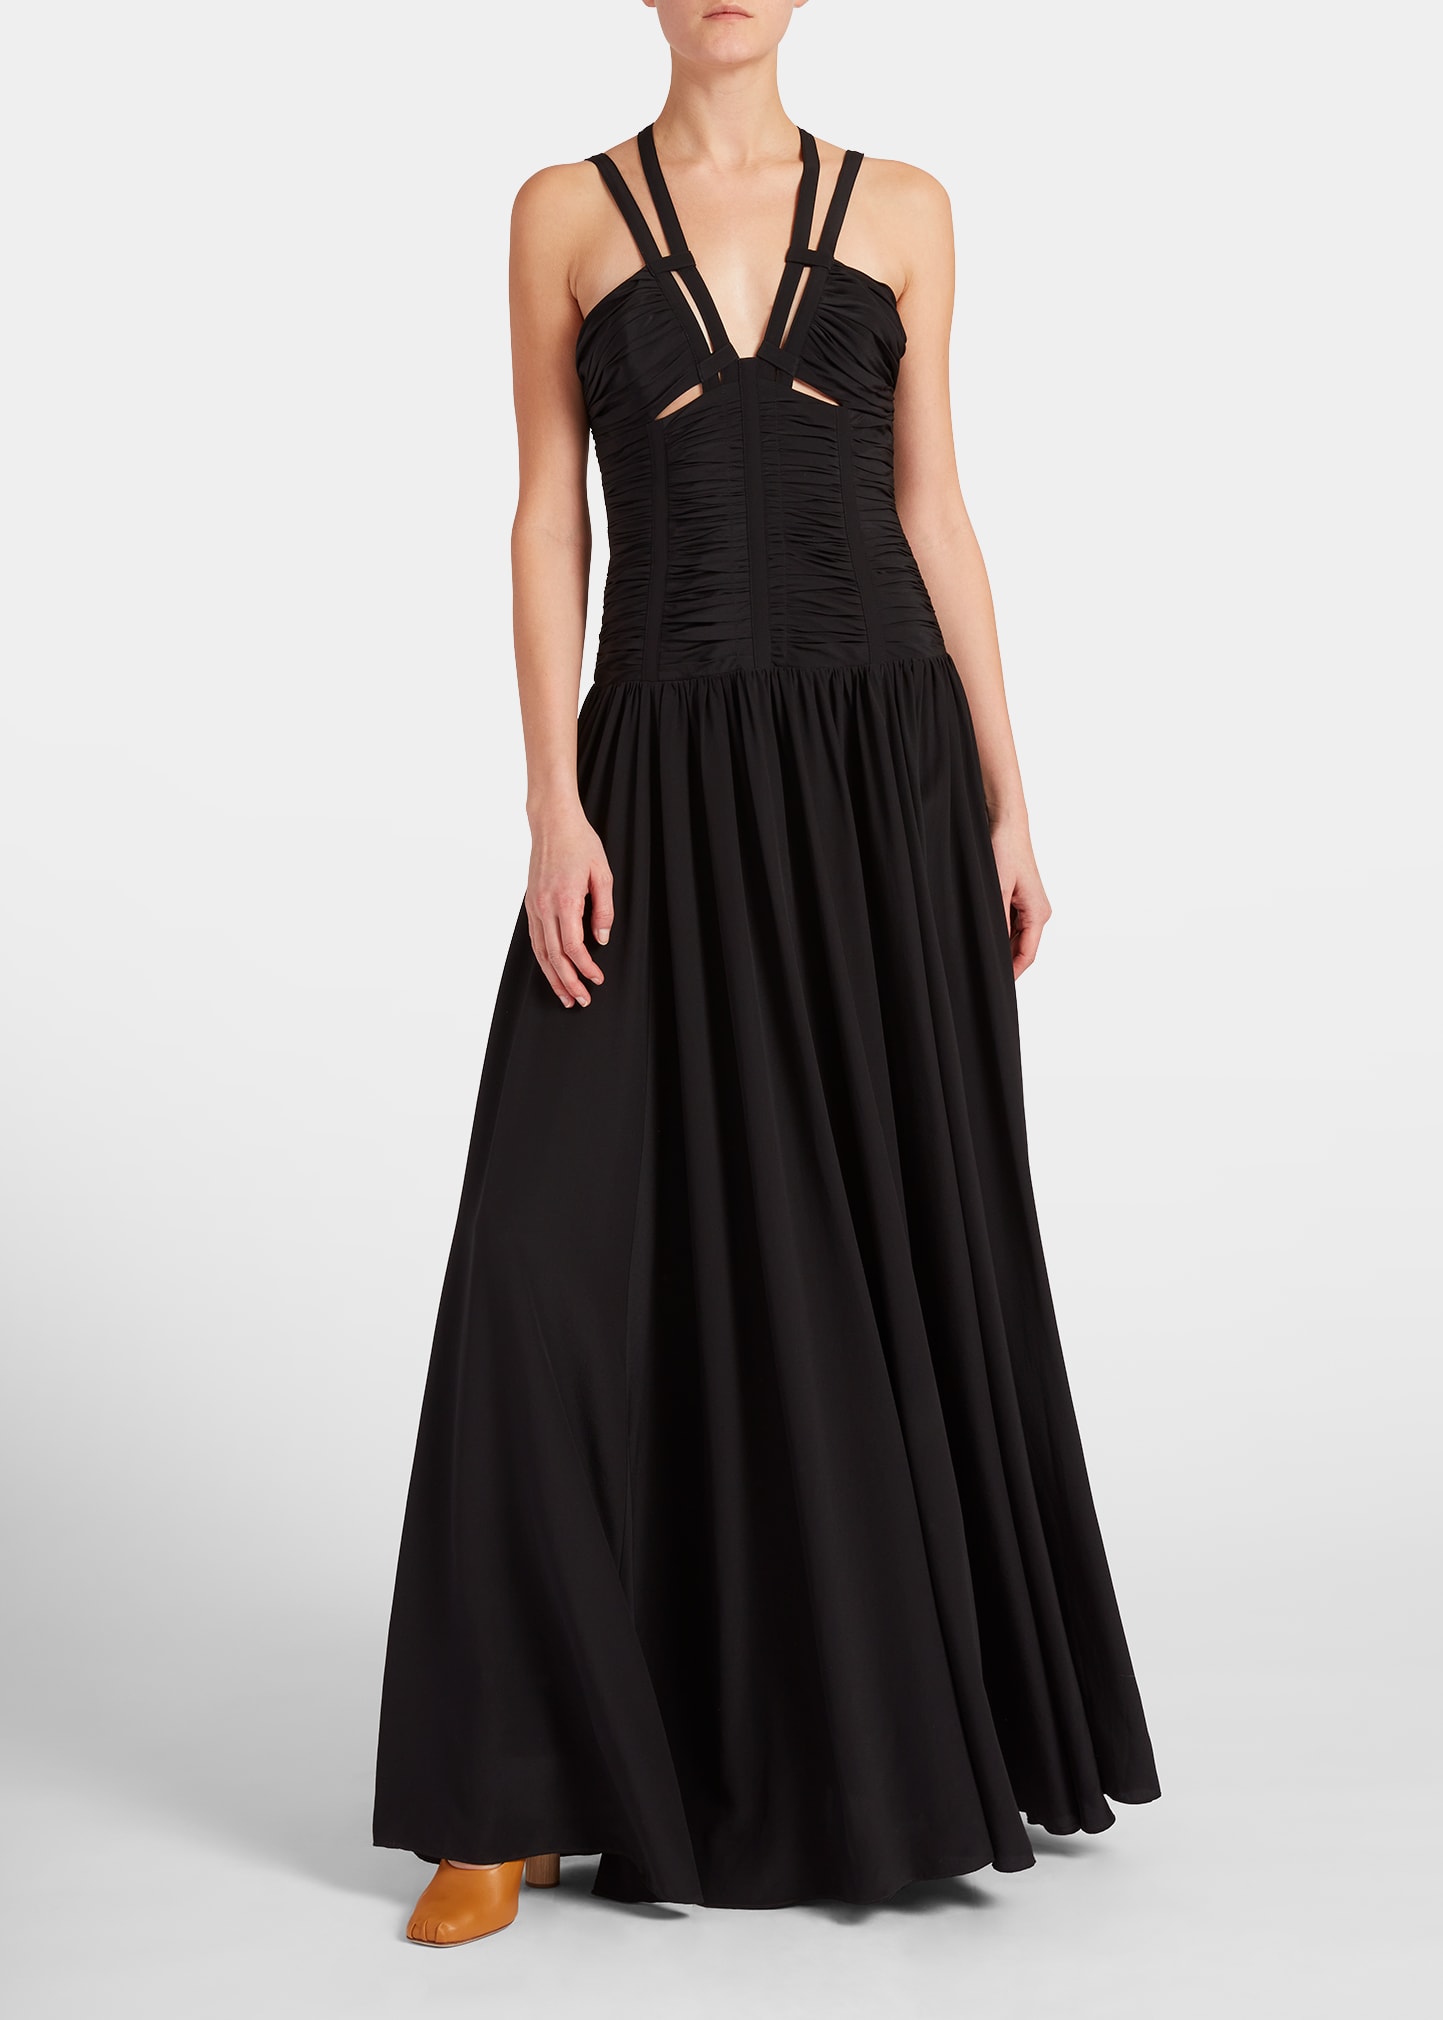 Ulla Johnson Anya Gathered Dropped Waist Gown In Noi Noir